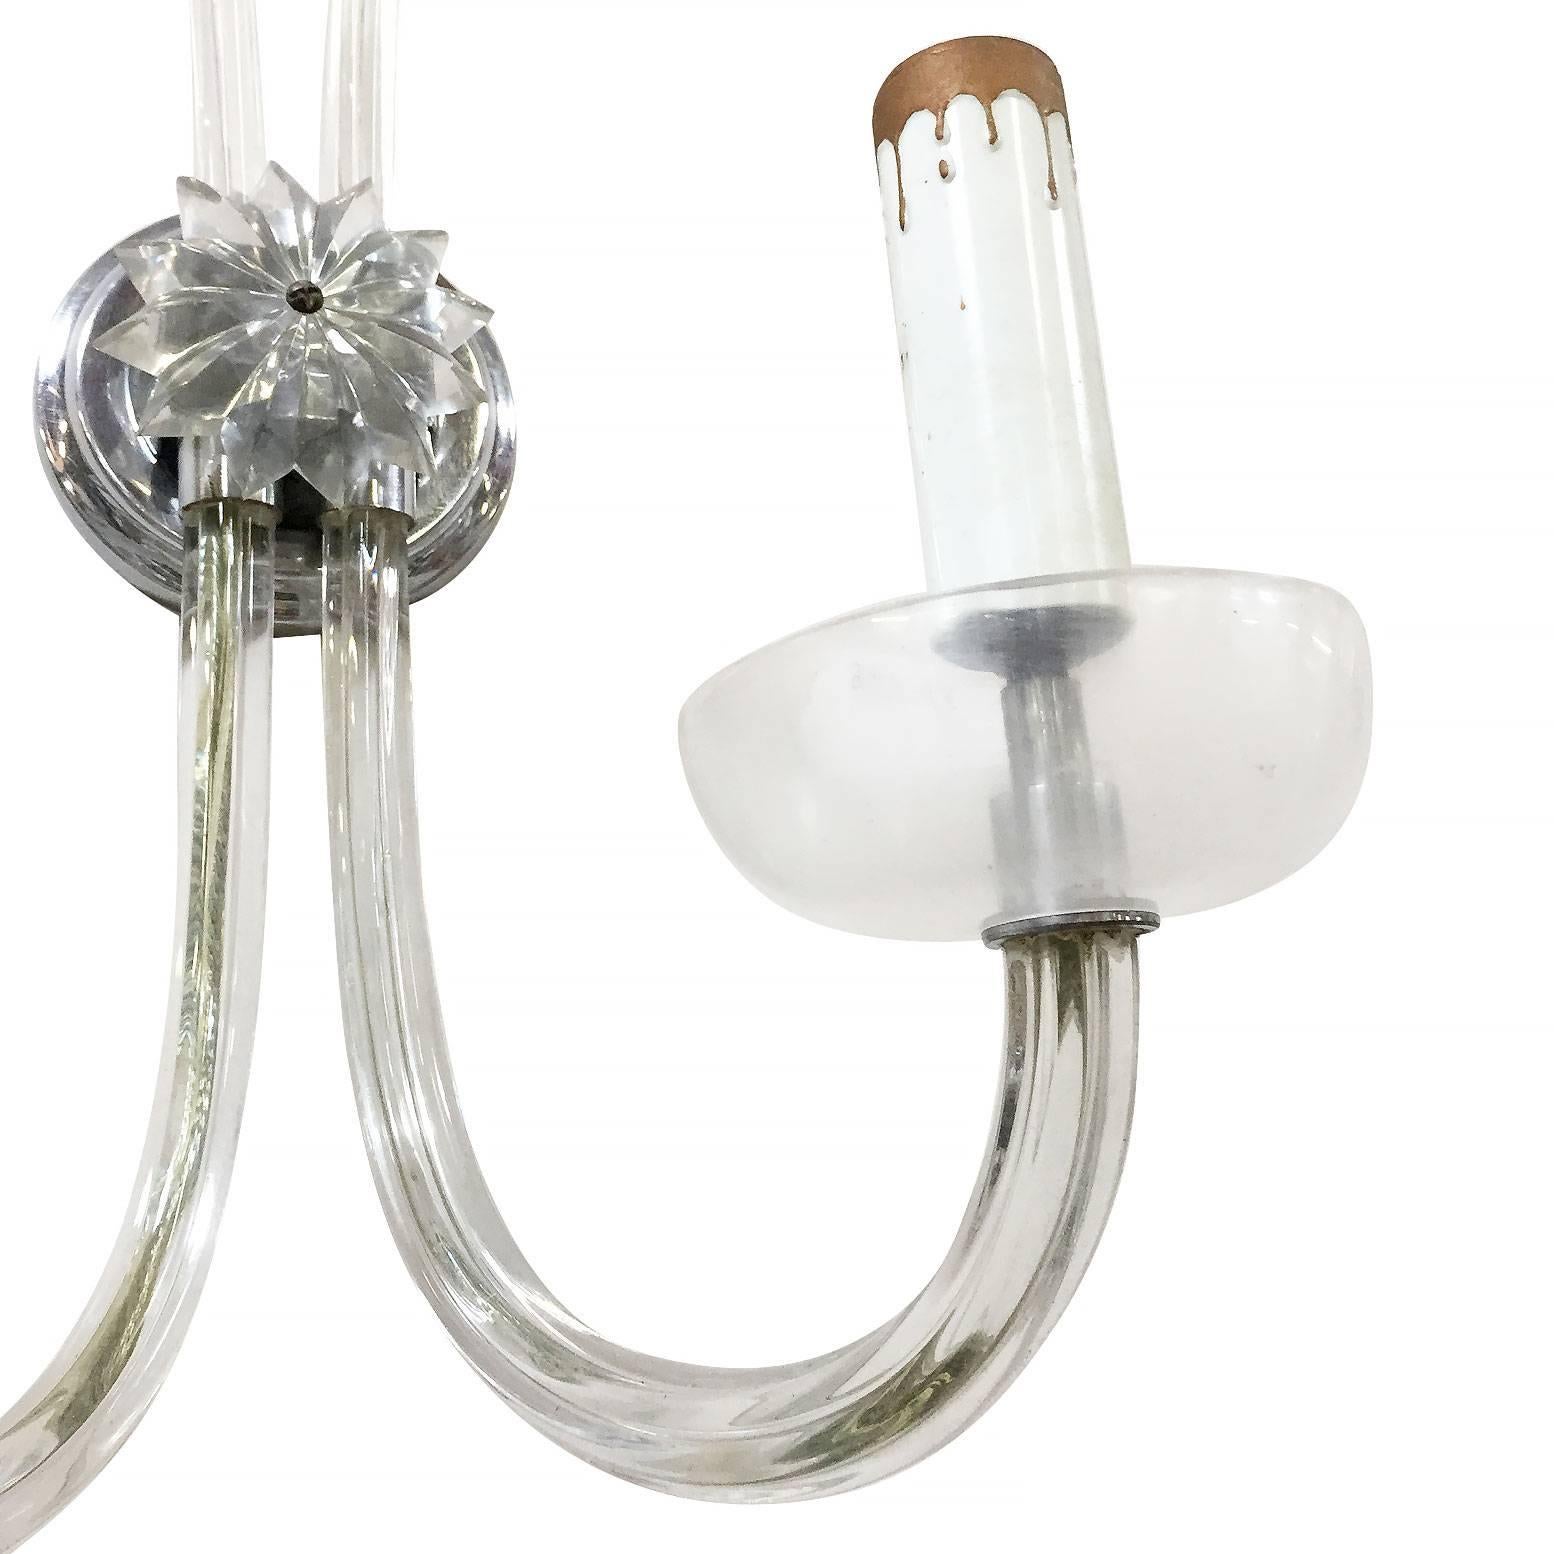 Mid-20th Century French Scrolling Crystal Wall Sconce Pair